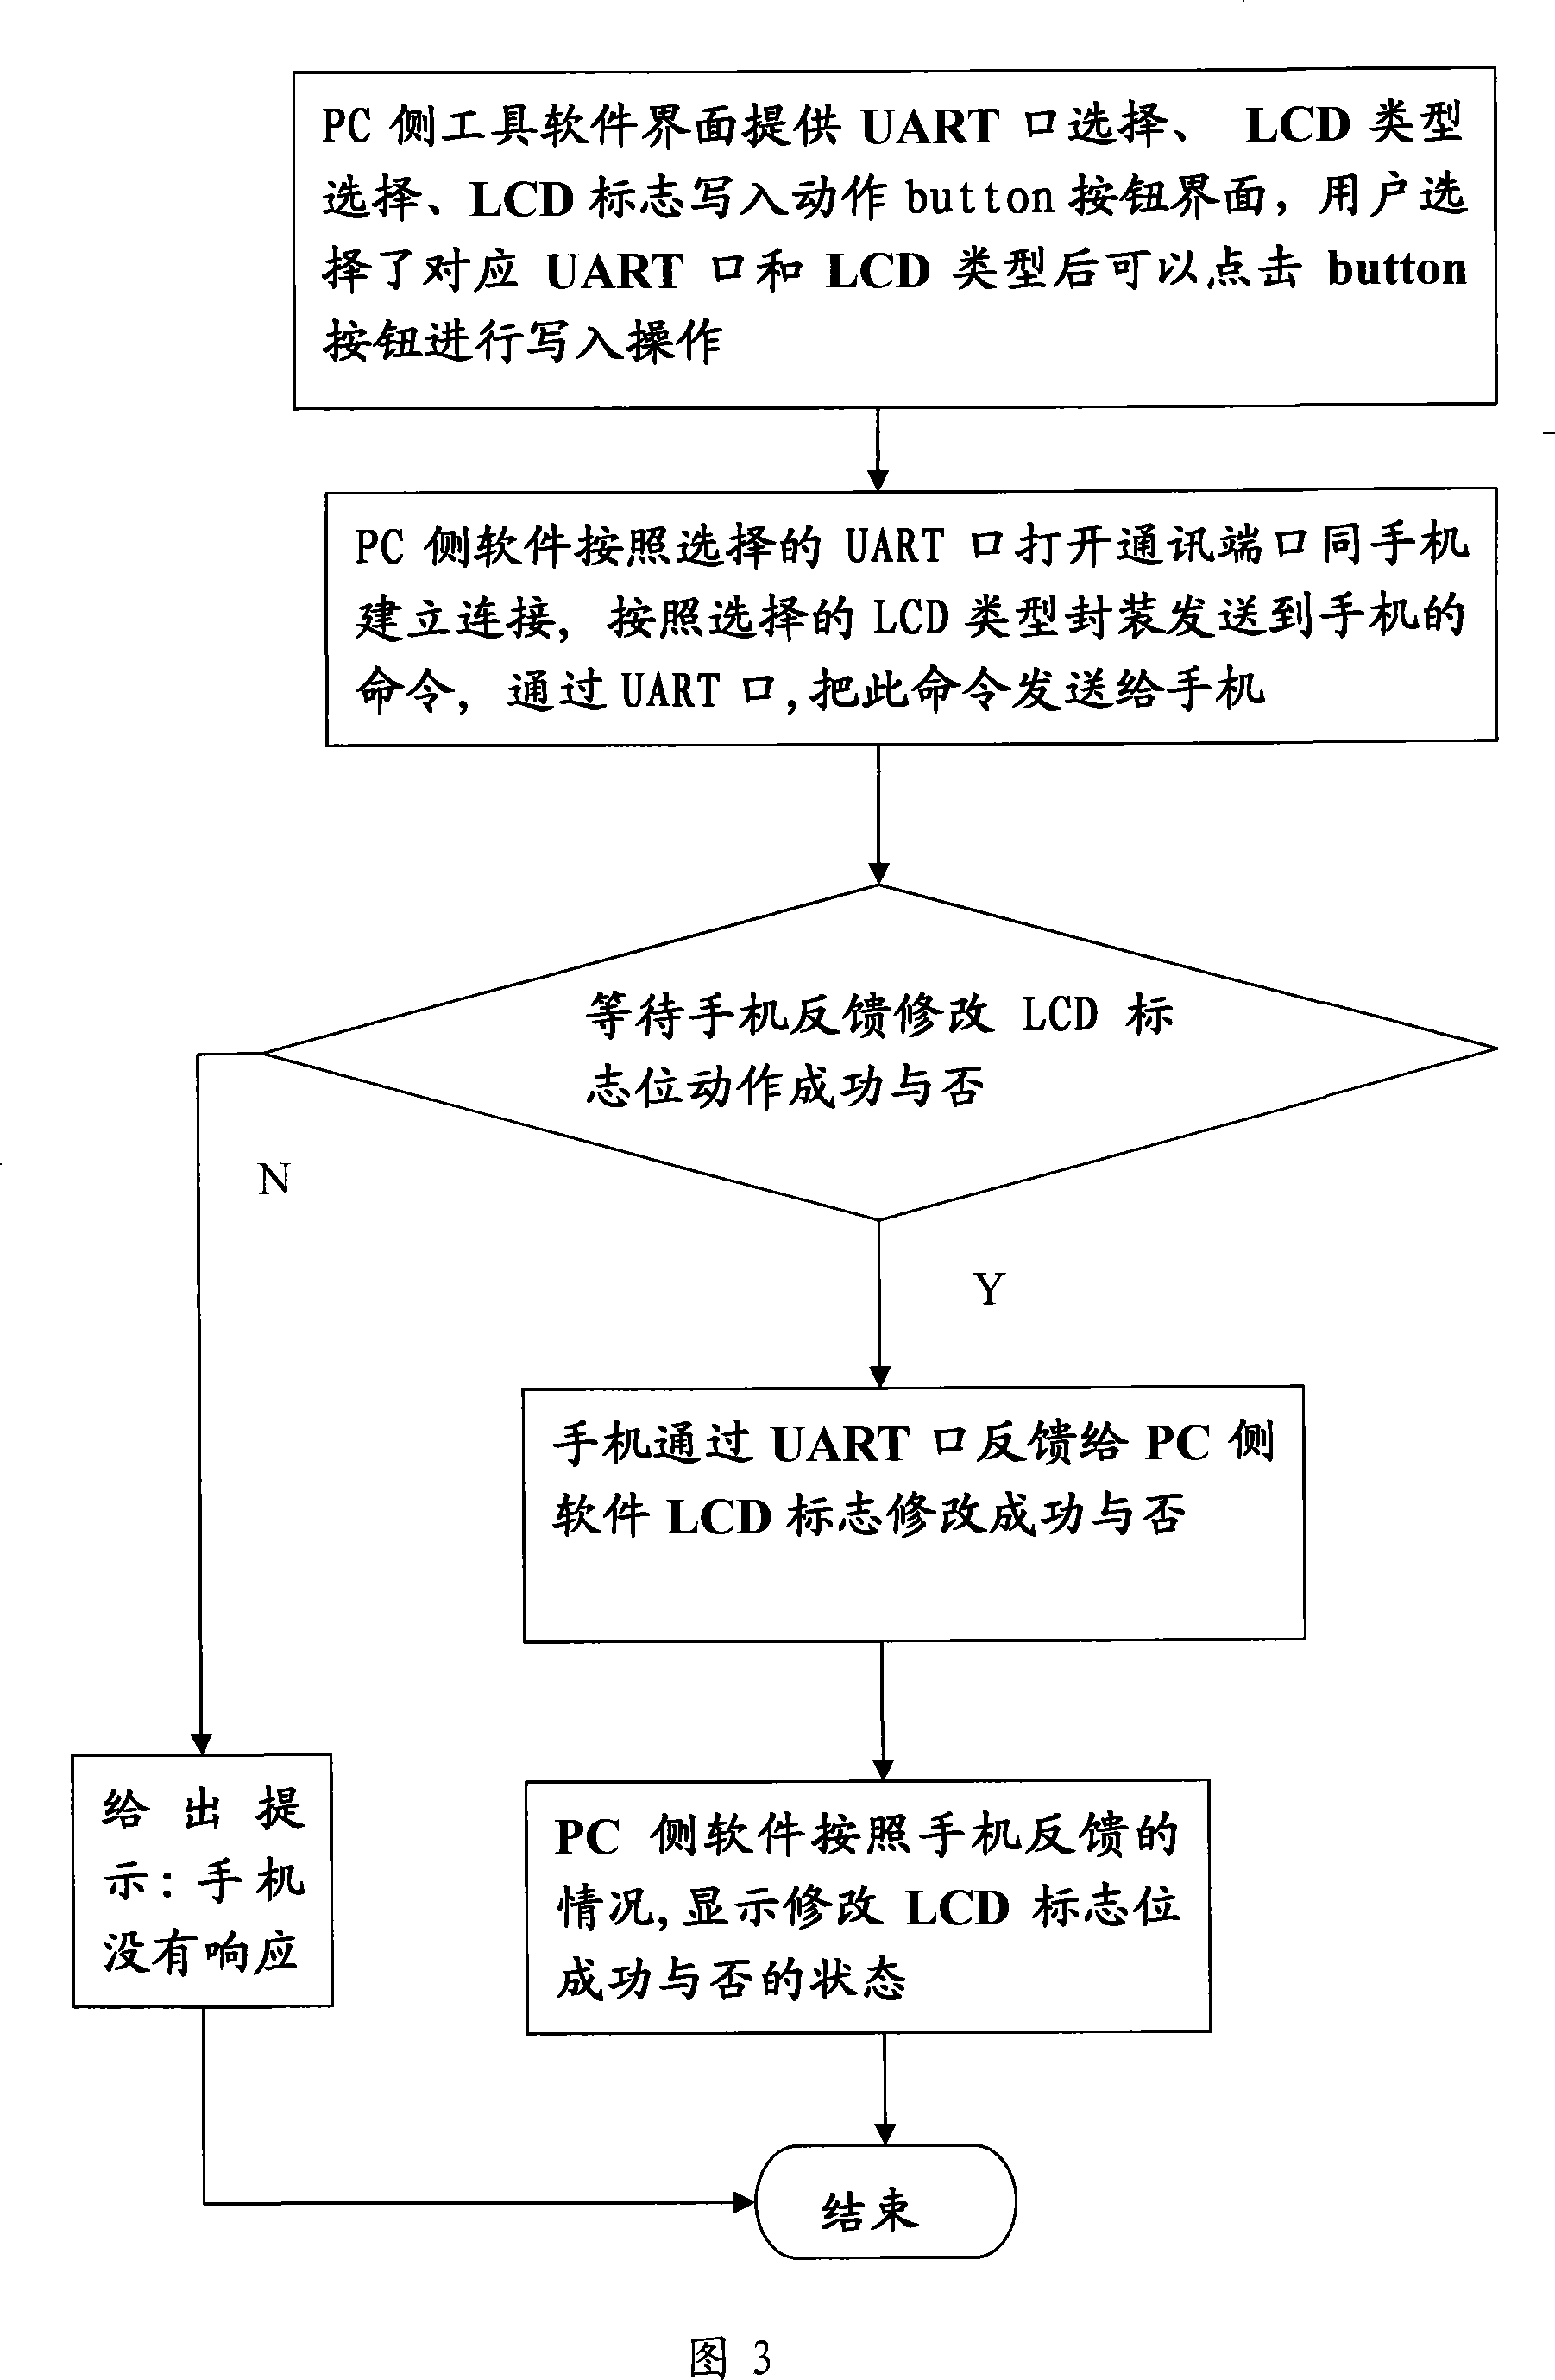 Method for mobile phone to be compatible to different display part